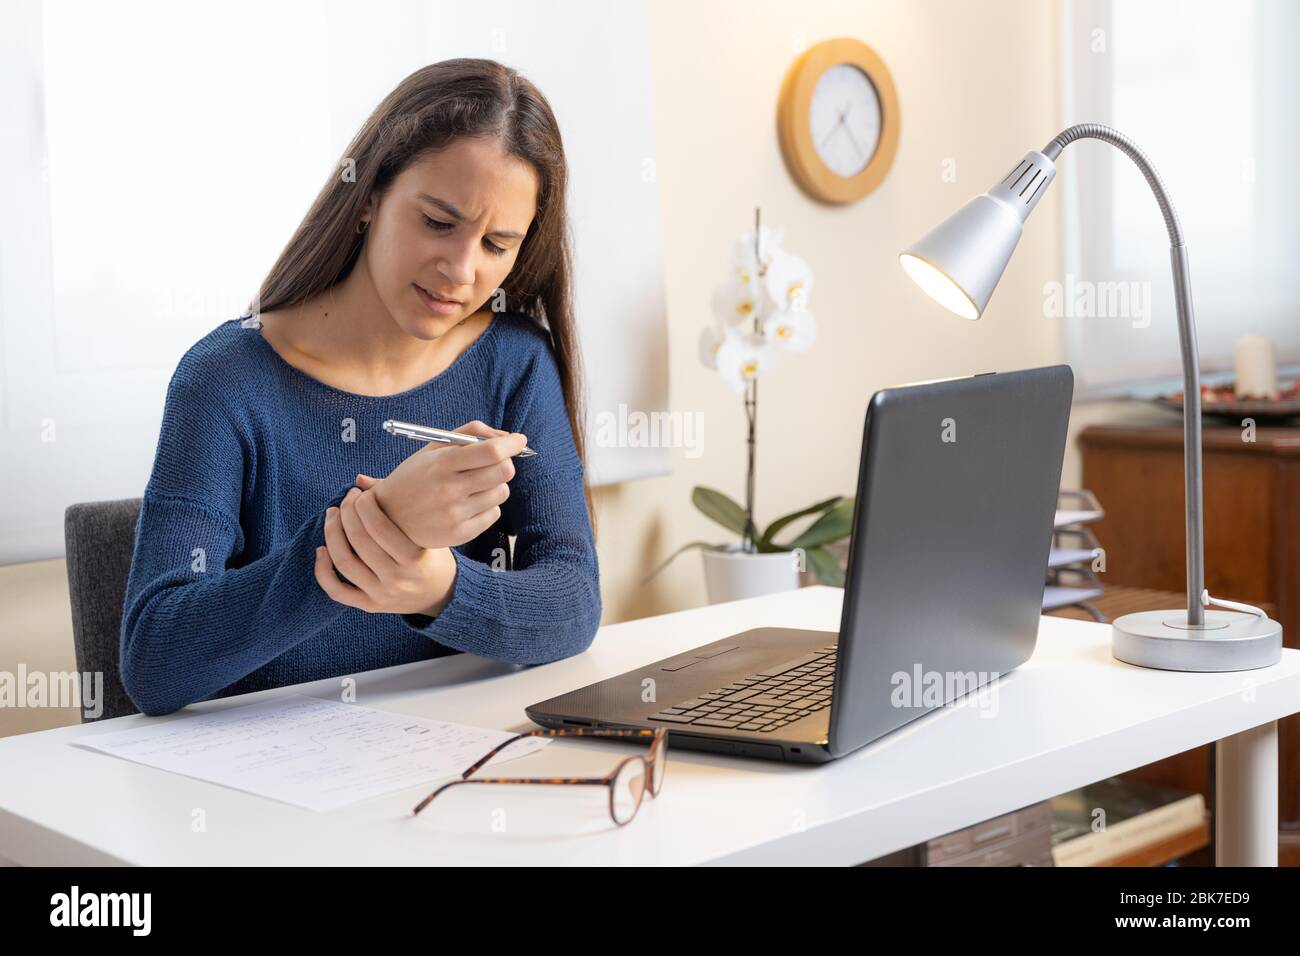 Teen girl with computer at home complaining of wrist pain Stock Photo